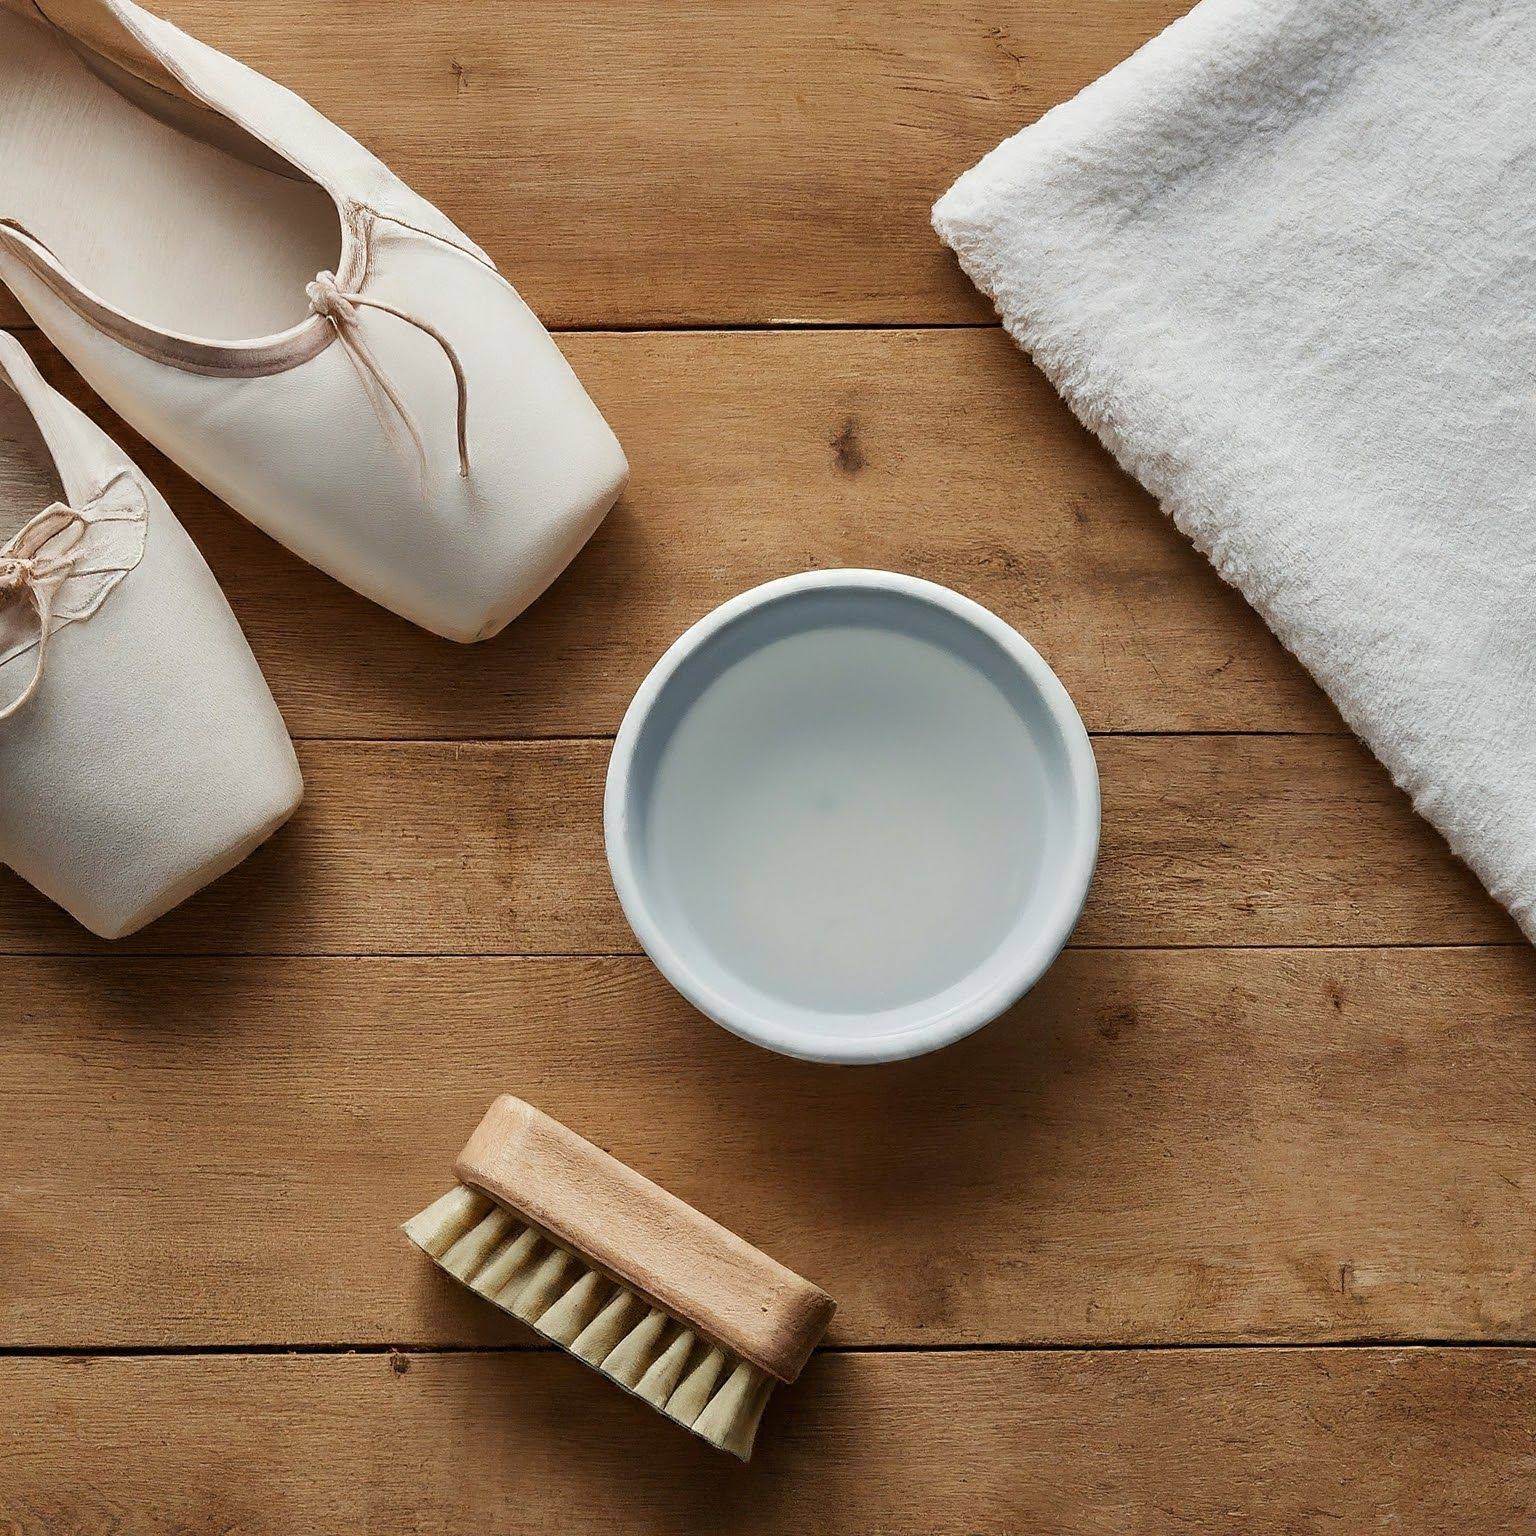 How to Clean Ballerina Shoes